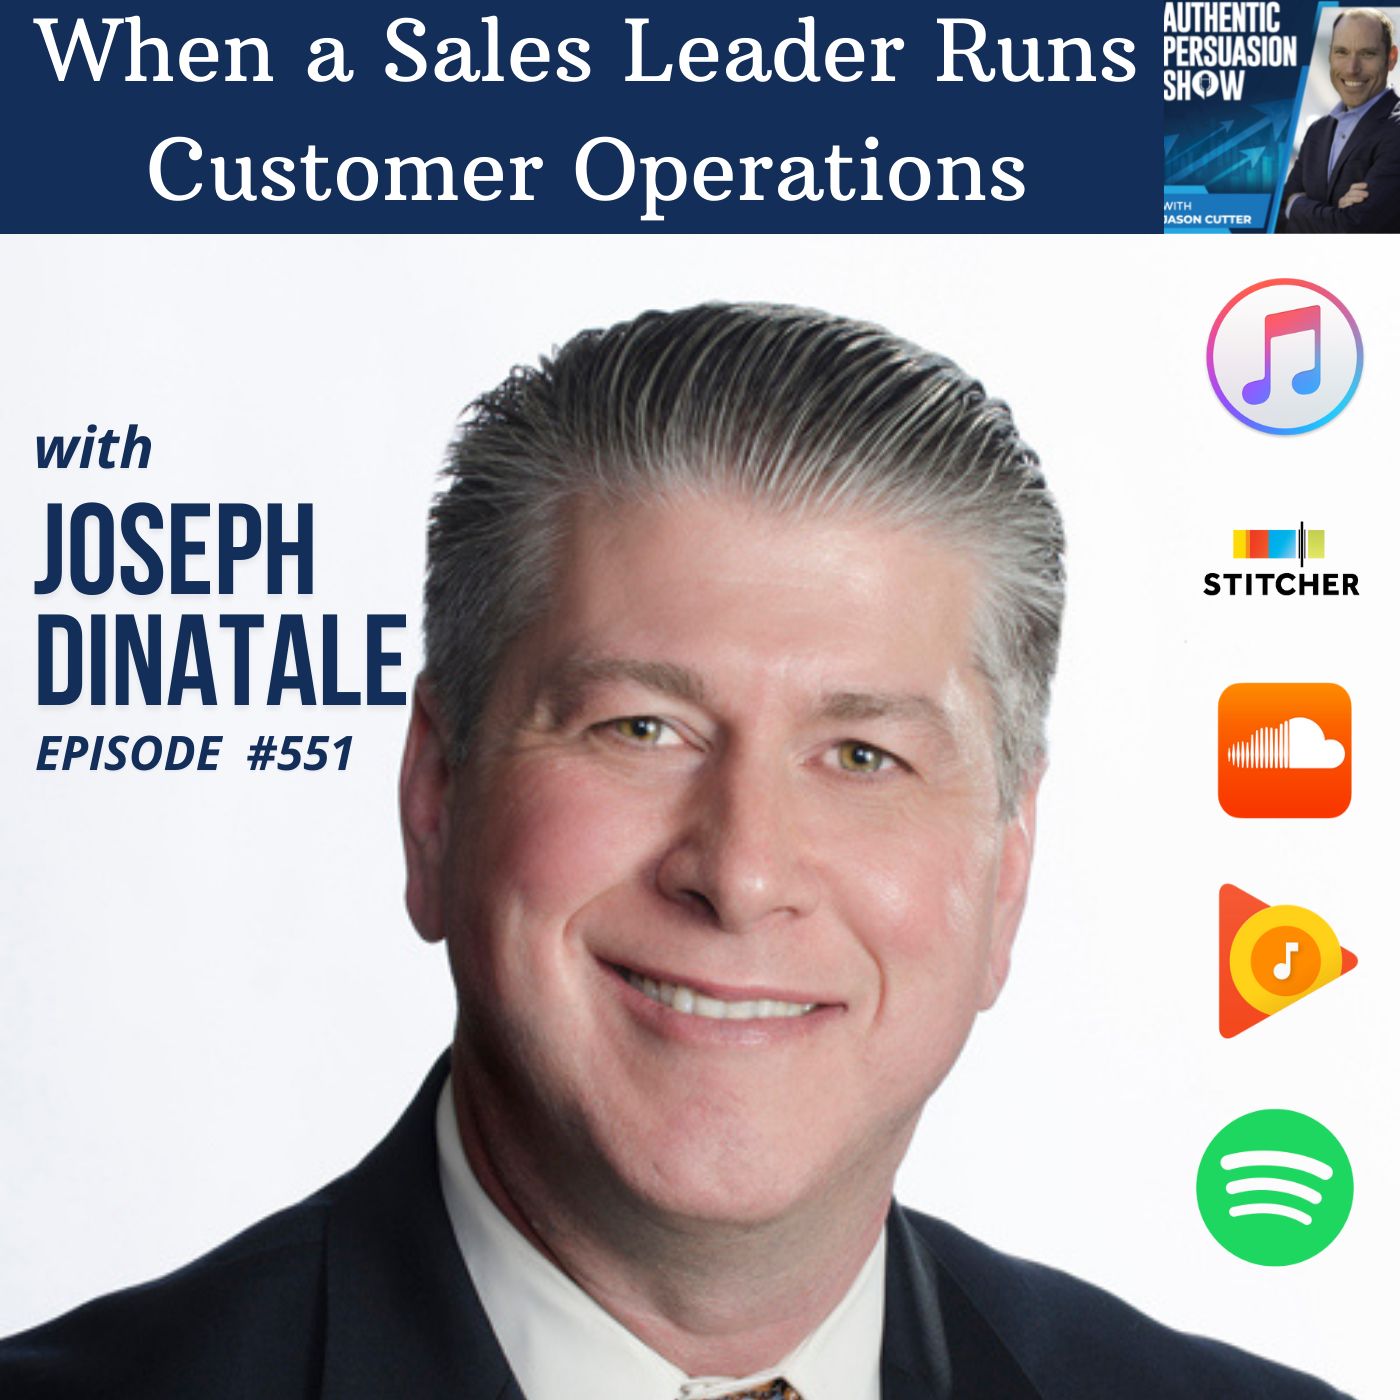 [551] When a Sales Leader Runs Customer Operations, with Joseph DiNatale Jr. from Breezeline